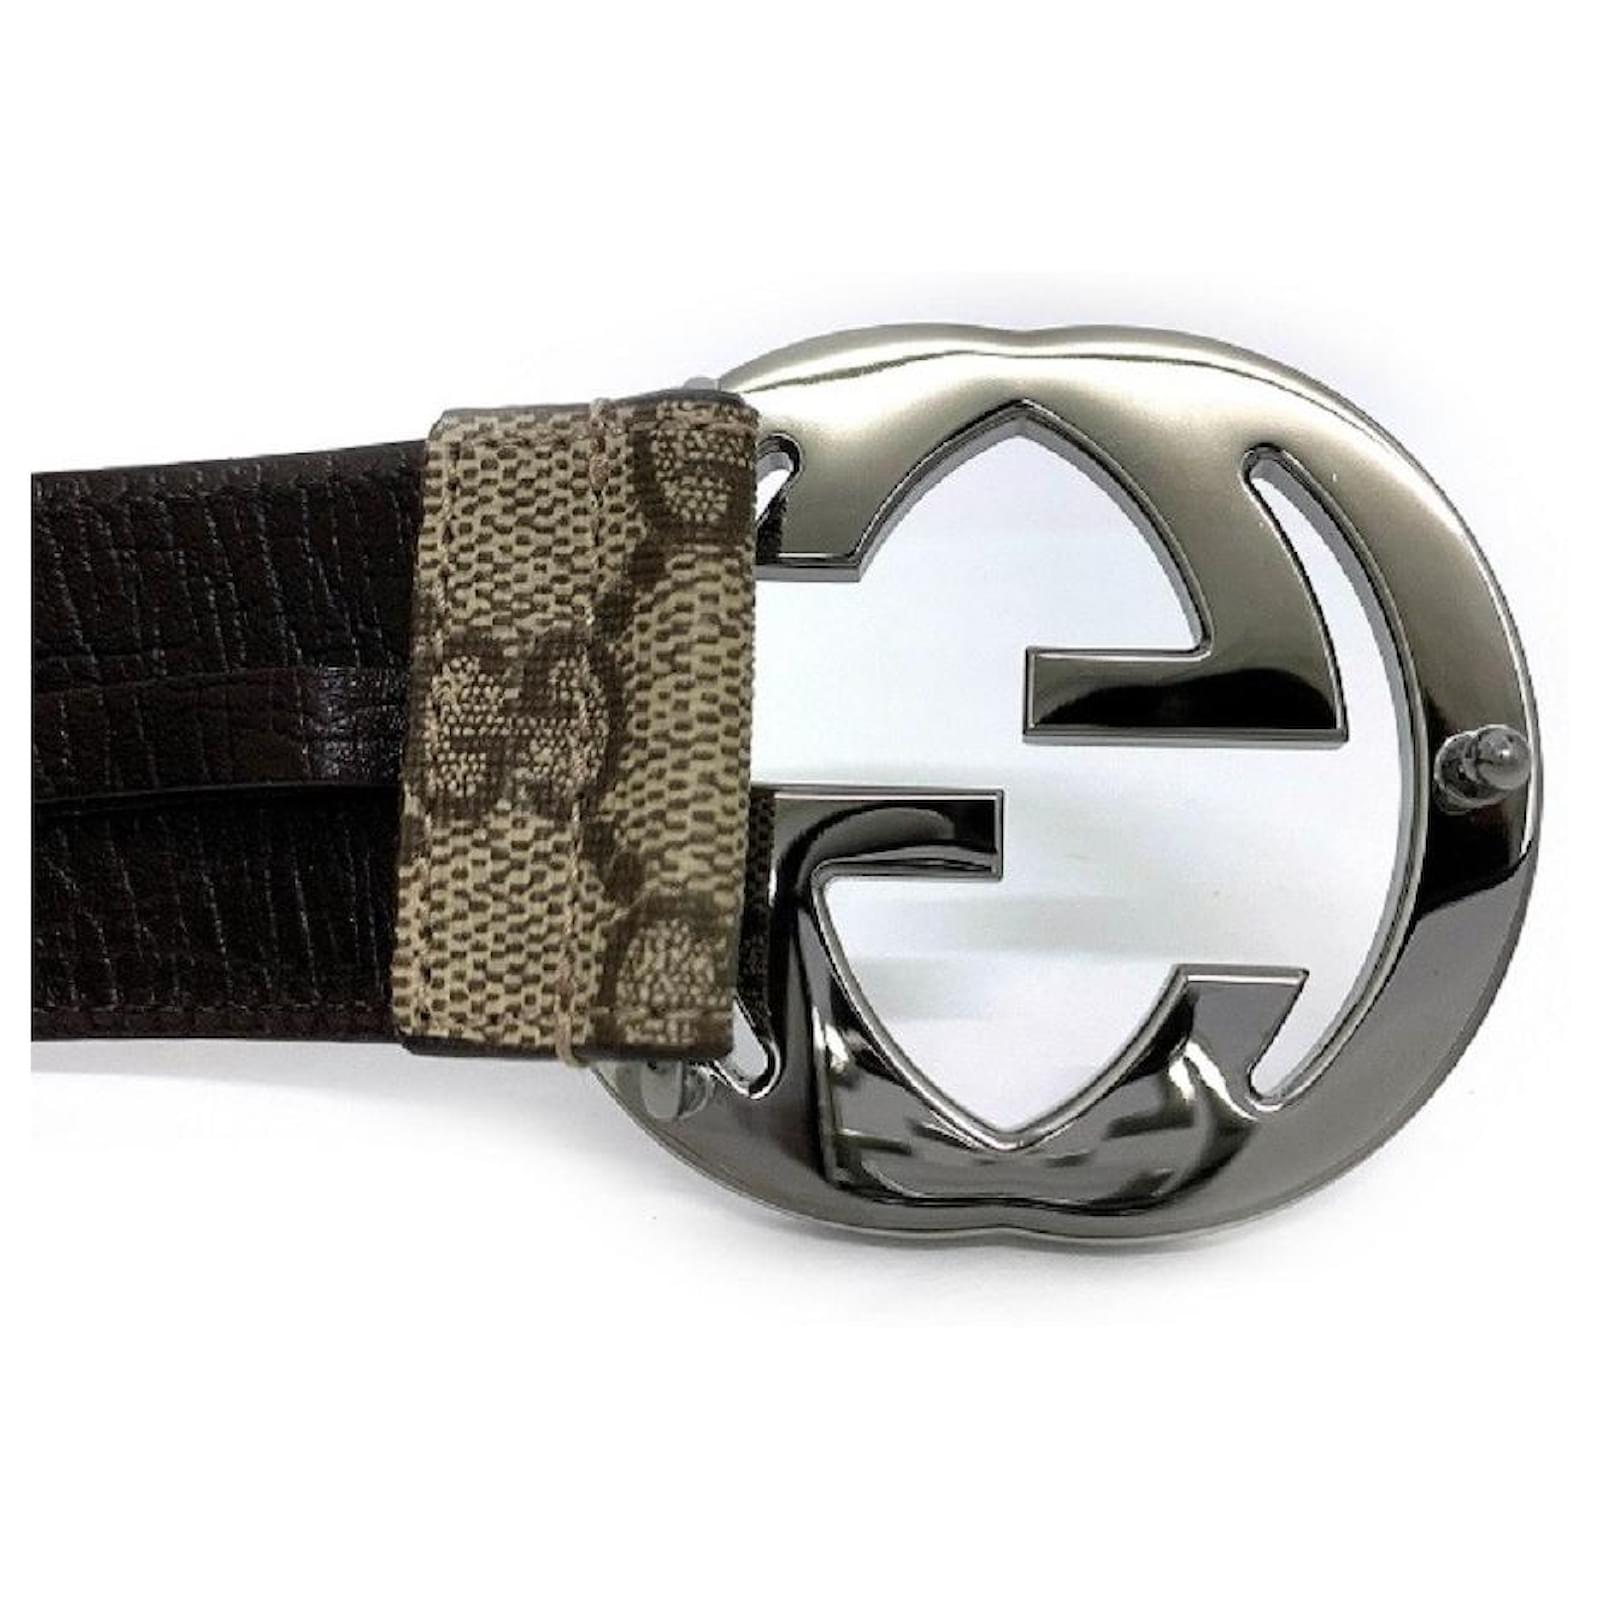 Gucci GG Supreme Beige Belt with Silver GG Buckle